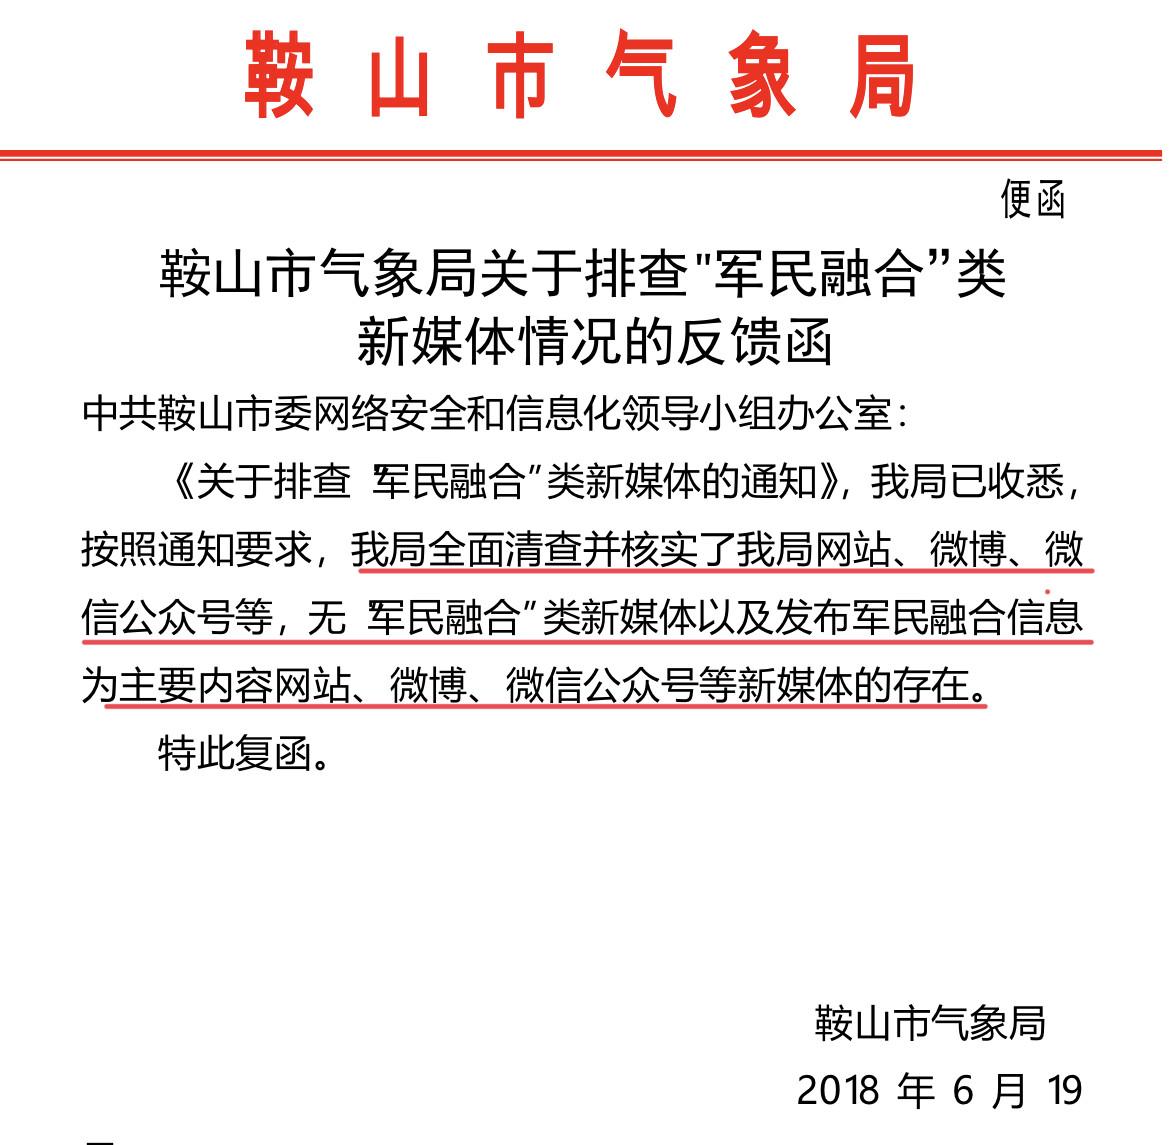 Screenshot of “Letter of feedback of investigation of information related to the Military-Civil Fusion on new media platforms” issued by Anshan City Weather Burea. (The Epoch Times.)